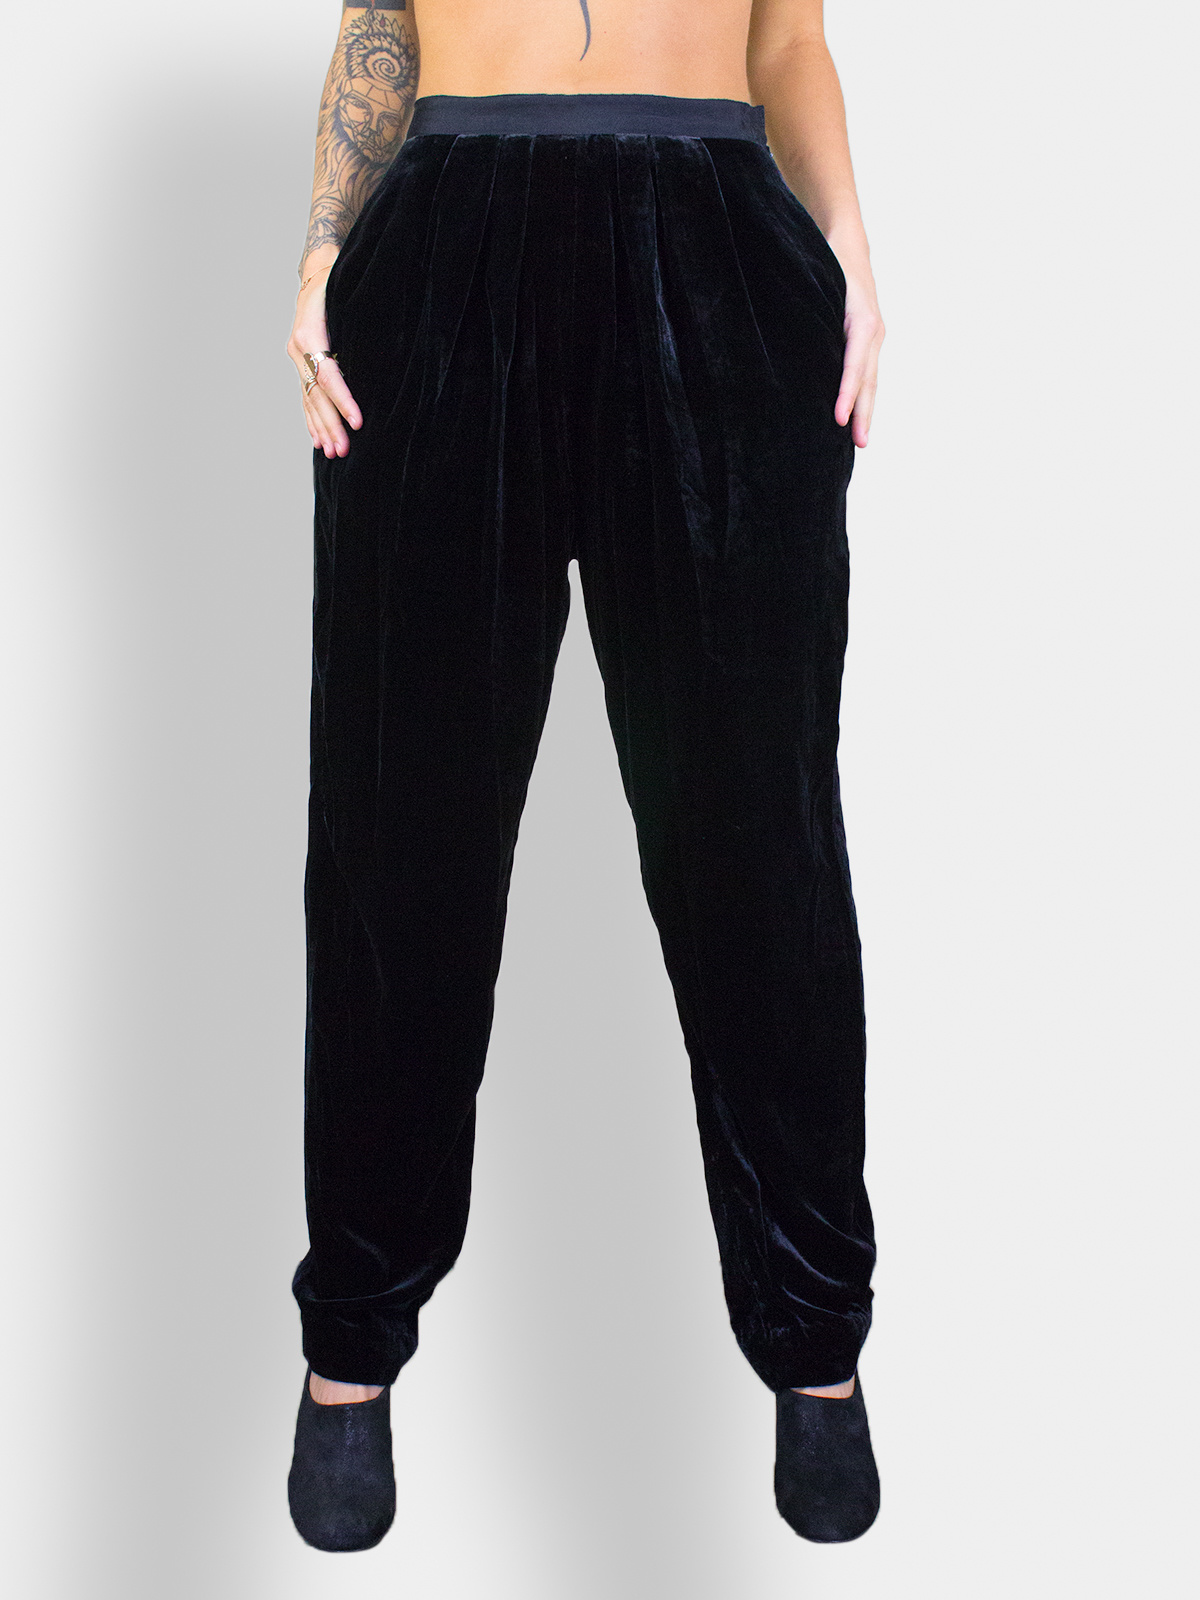 Pleated Trouser Black - Alhambra  Women's Clothing Boutique, Seattle